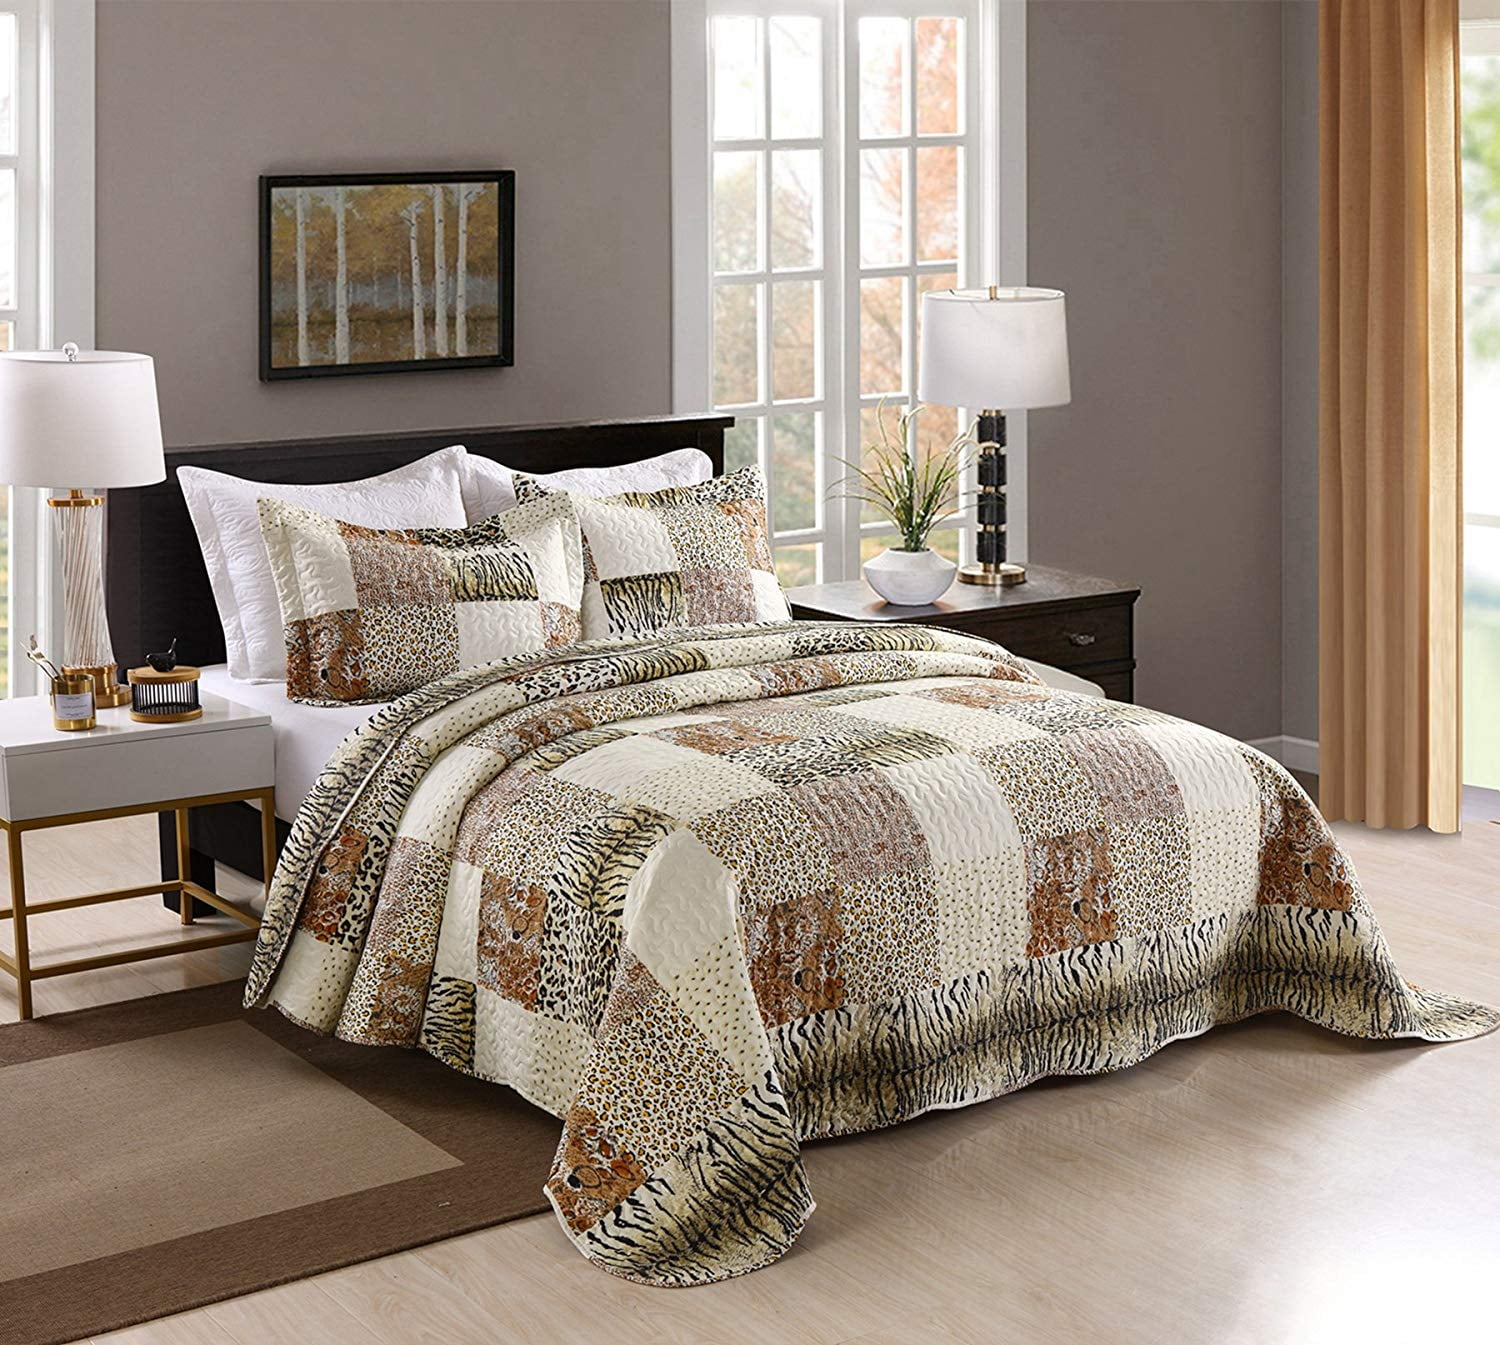 3PC Quilted Bedspread Cover Oversized High Quality Embroidery Quilt Coffee Brown 